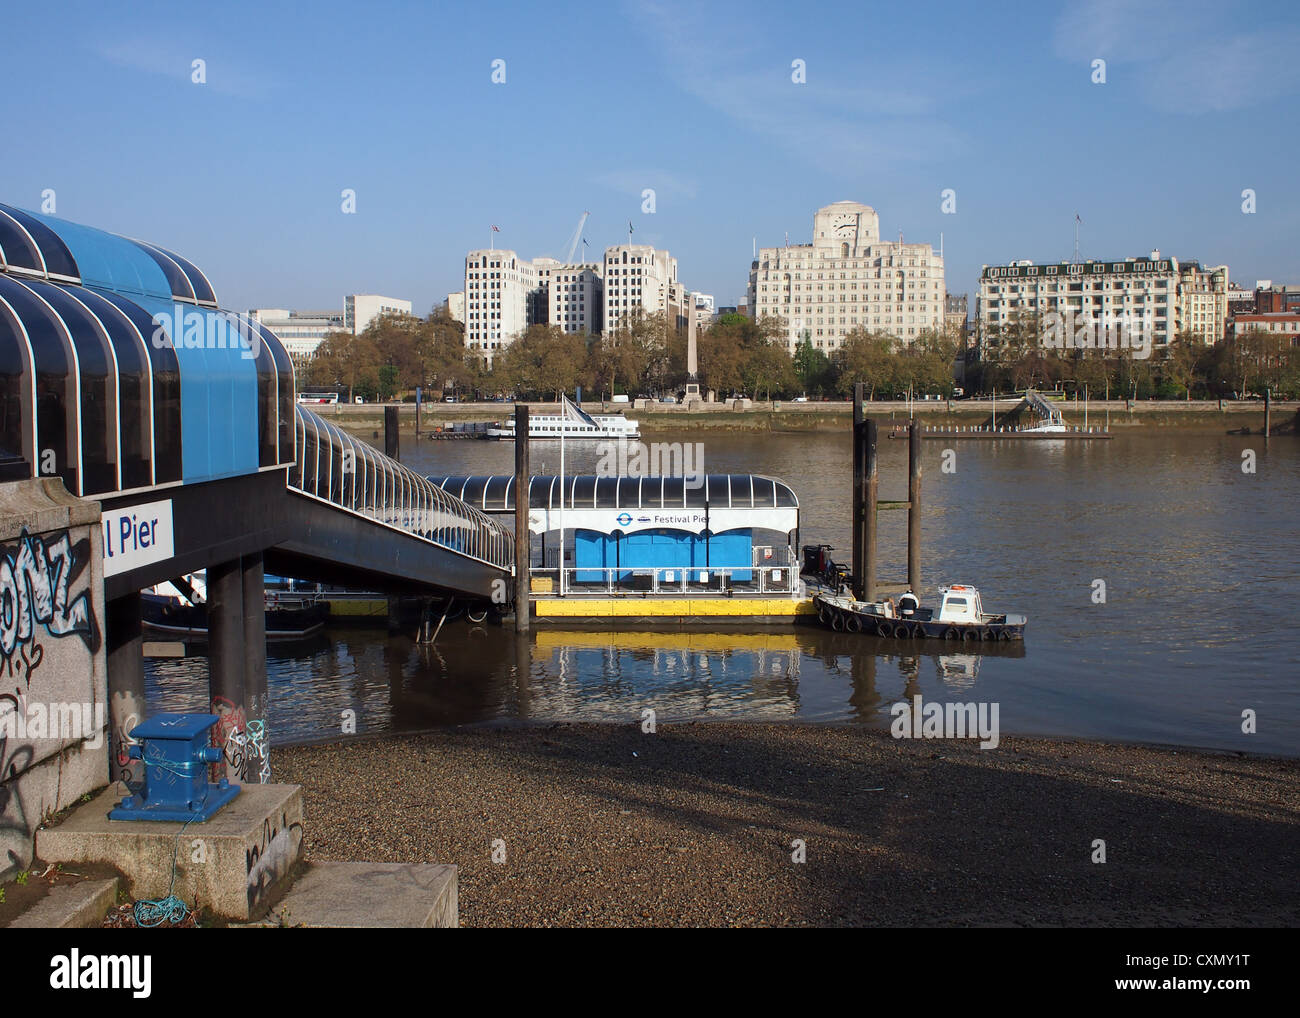 Festival Pier on the south bank of the River Thames. Across the river are  The Adlephi, Shell Mex House, Savoy Hotel, Cleopatra Stock Photo